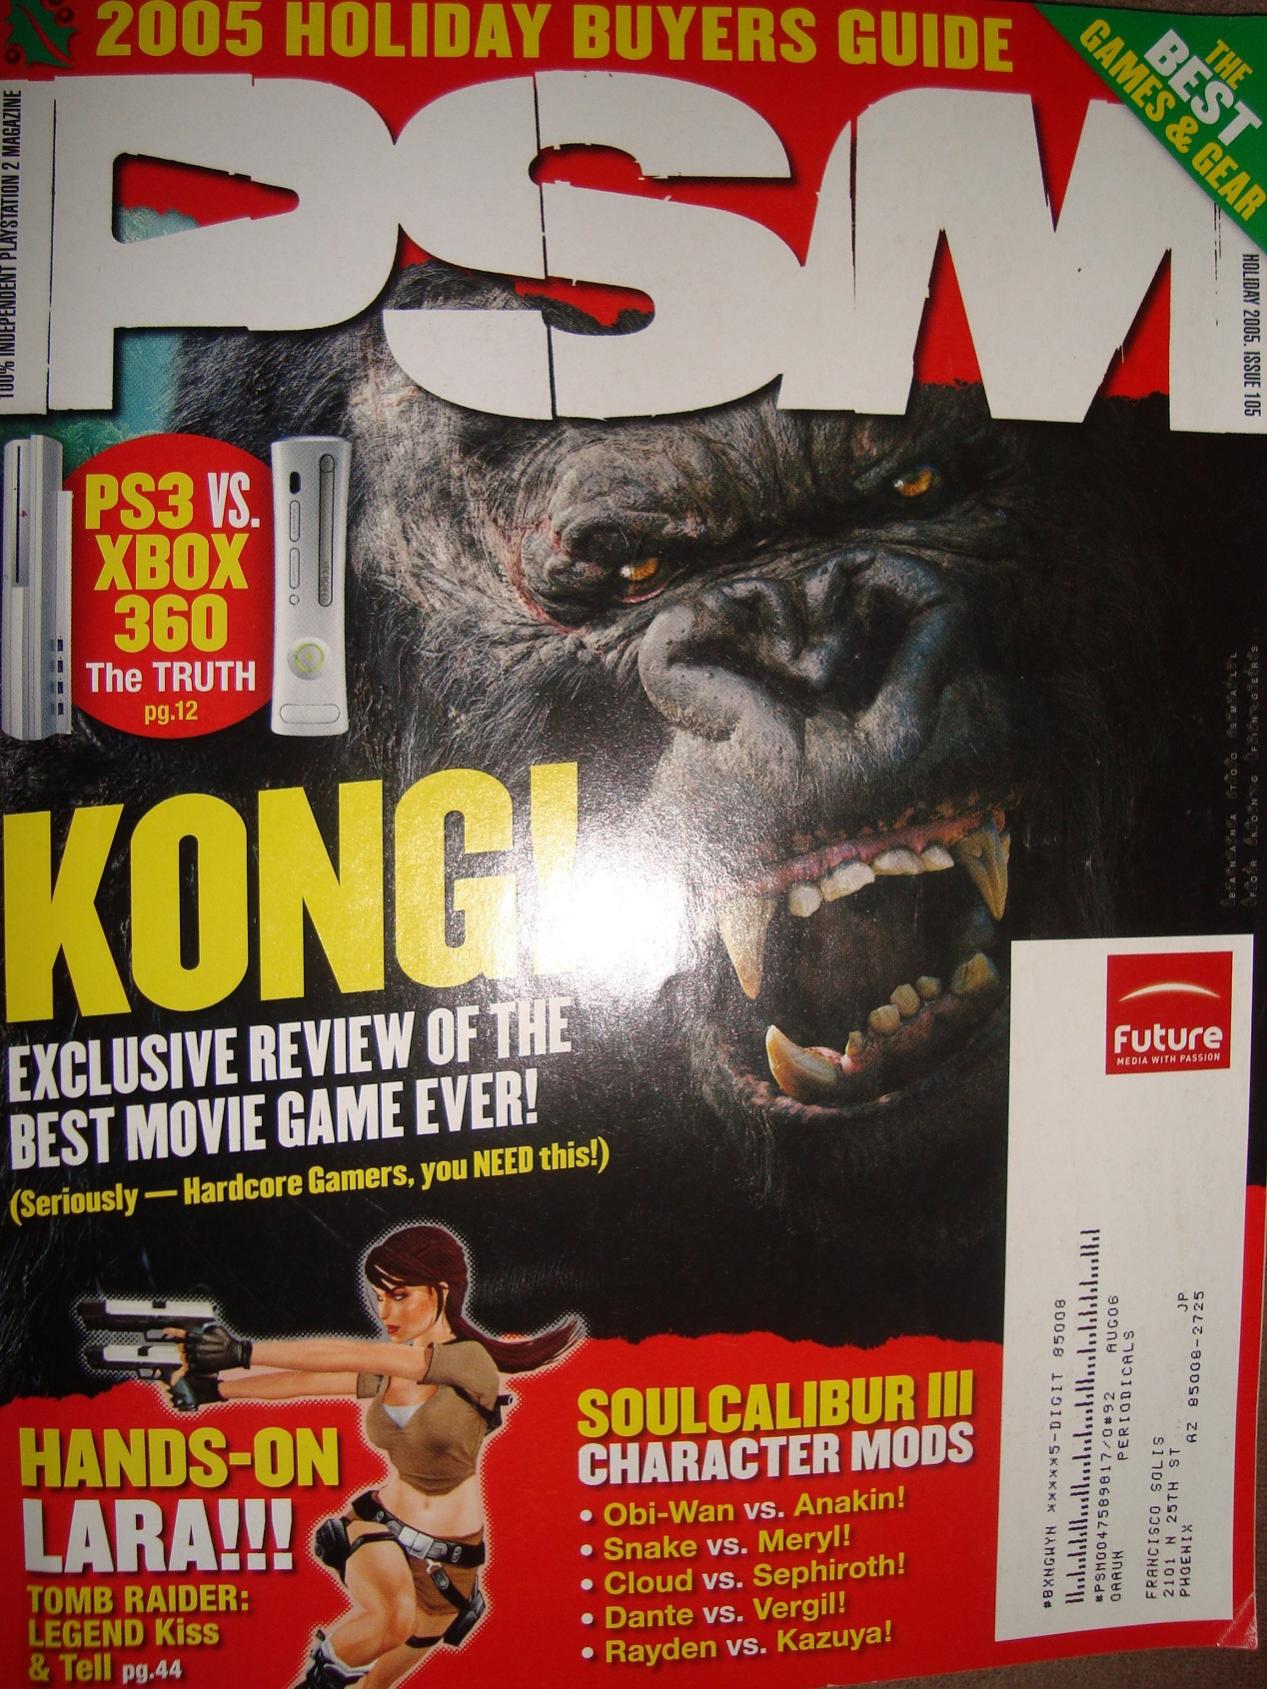 PSM Kong Issue